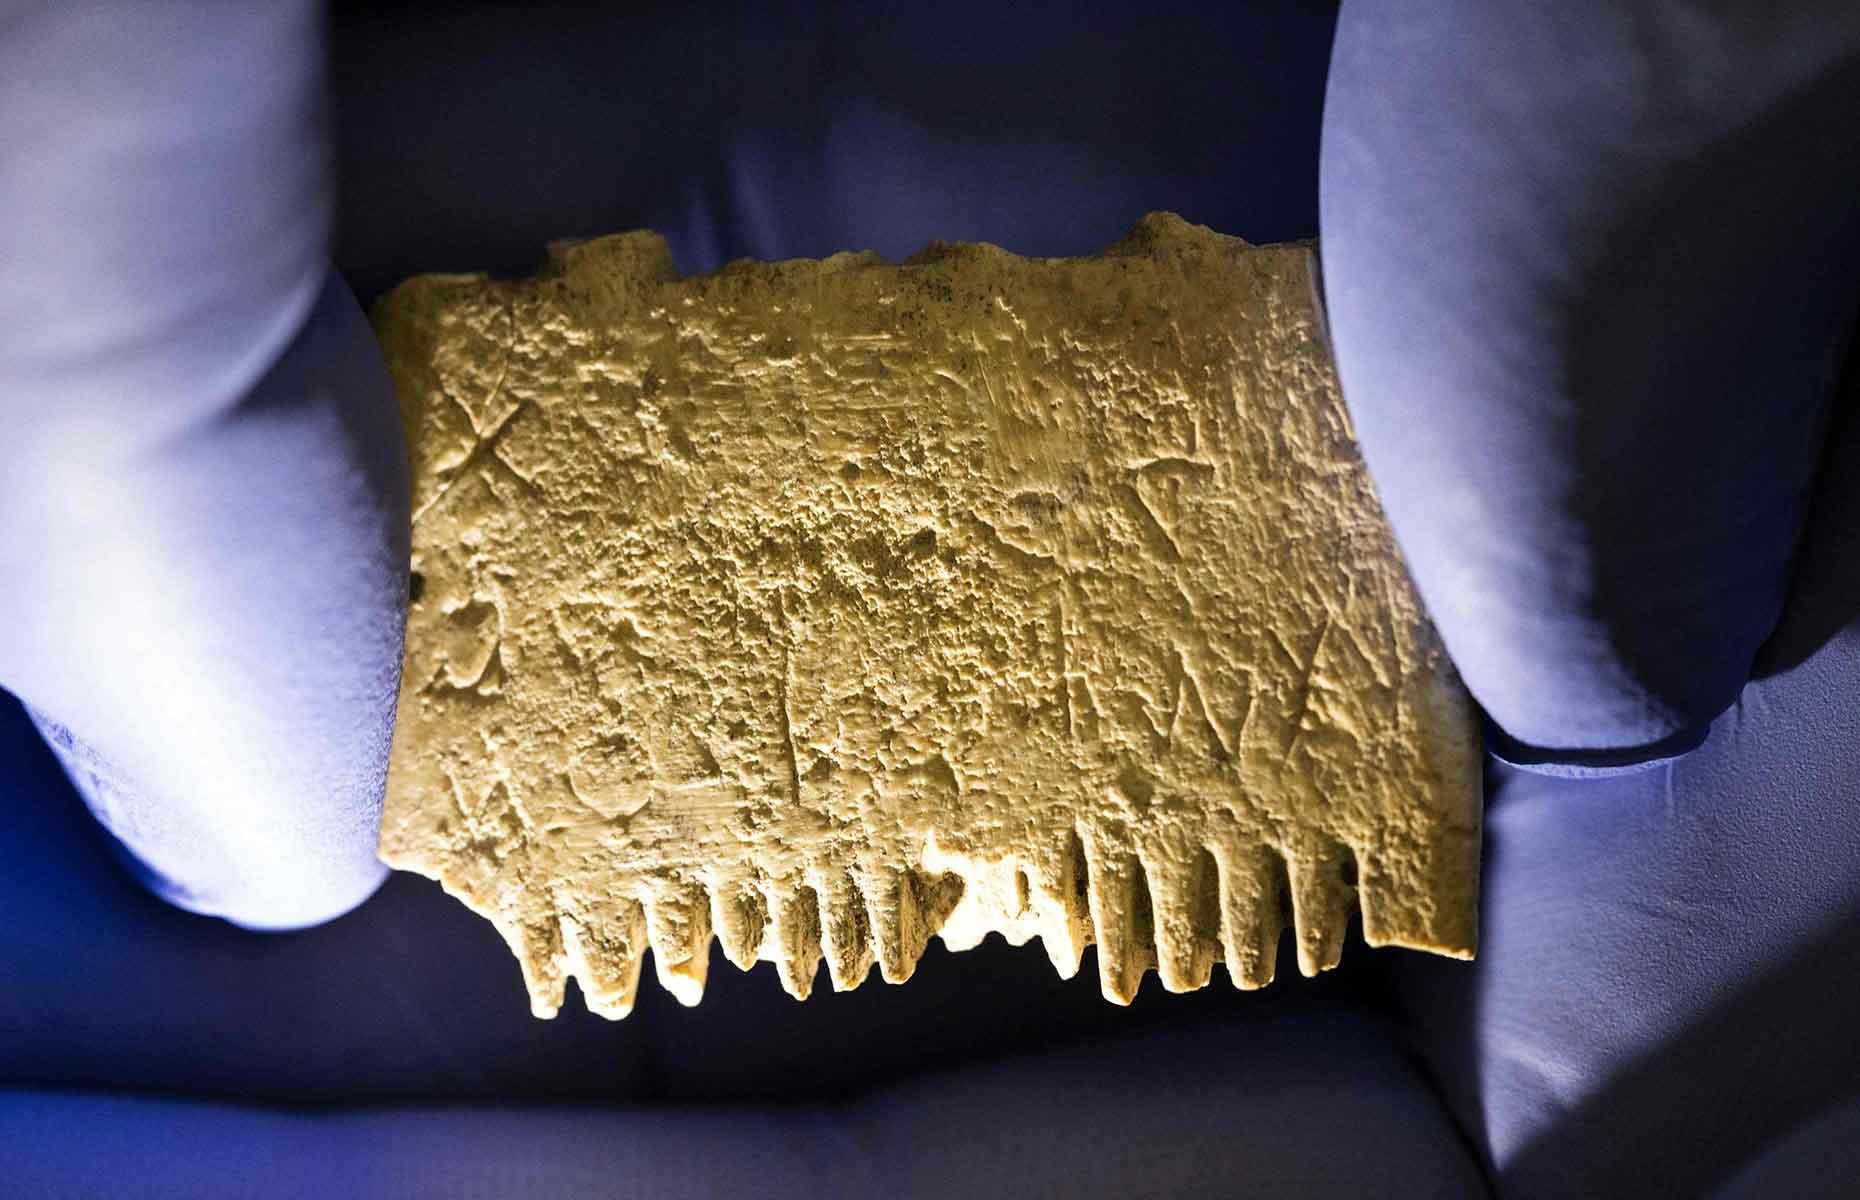 <p>The <a href="https://www.theguardian.com/science/2022/nov/09/oldest-known-written-sentence-discovered-on-a-head-lice-comb">oldest known sentence written in the earliest alphabet</a> has been discovered – on a head-lice comb. While the 3.5cm-long tool was discovered in 2017, its engravings were only spotted in 2021; the text reads "May this tusk root out the lice of the hair and beard". The find was excavated in Lachish, an ancient Canaanite city state, and possibly dates to 1700 BC. Archaeologists say this was a luxury item as most others were simply made from wood or bone.</p>